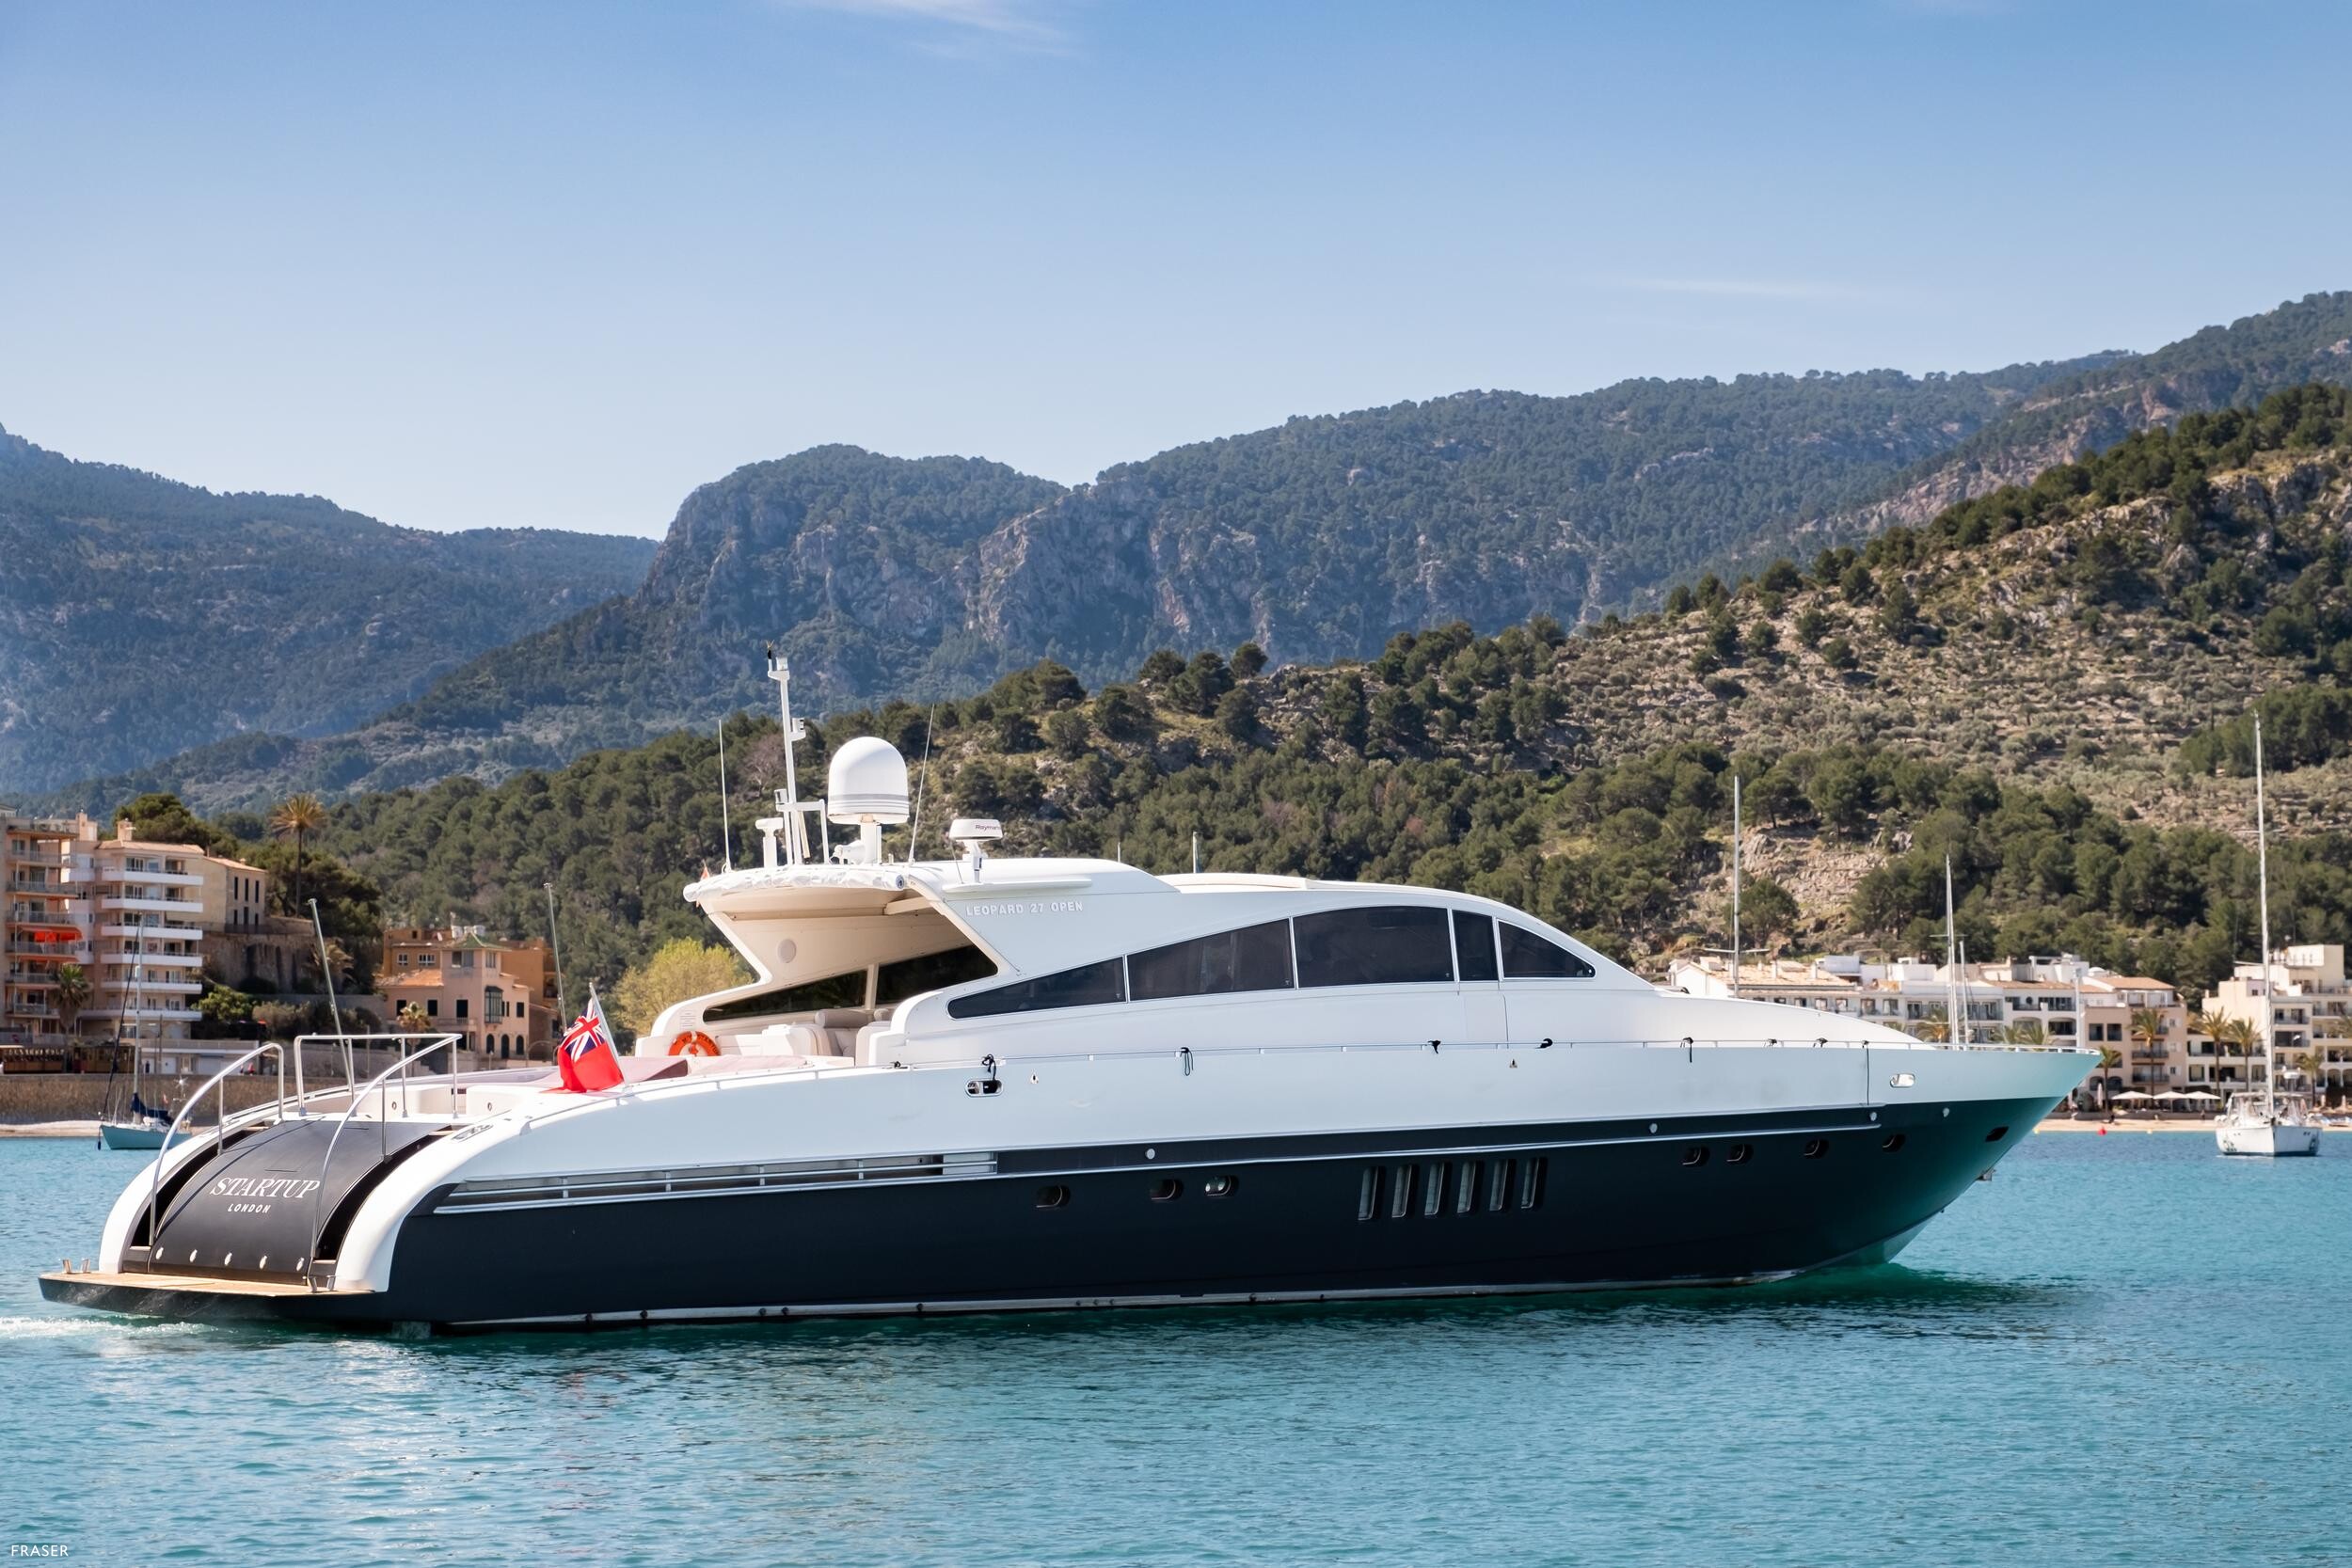 STARTUP motor yacht for sale by FRASER, built by Cantiere Navale Arno